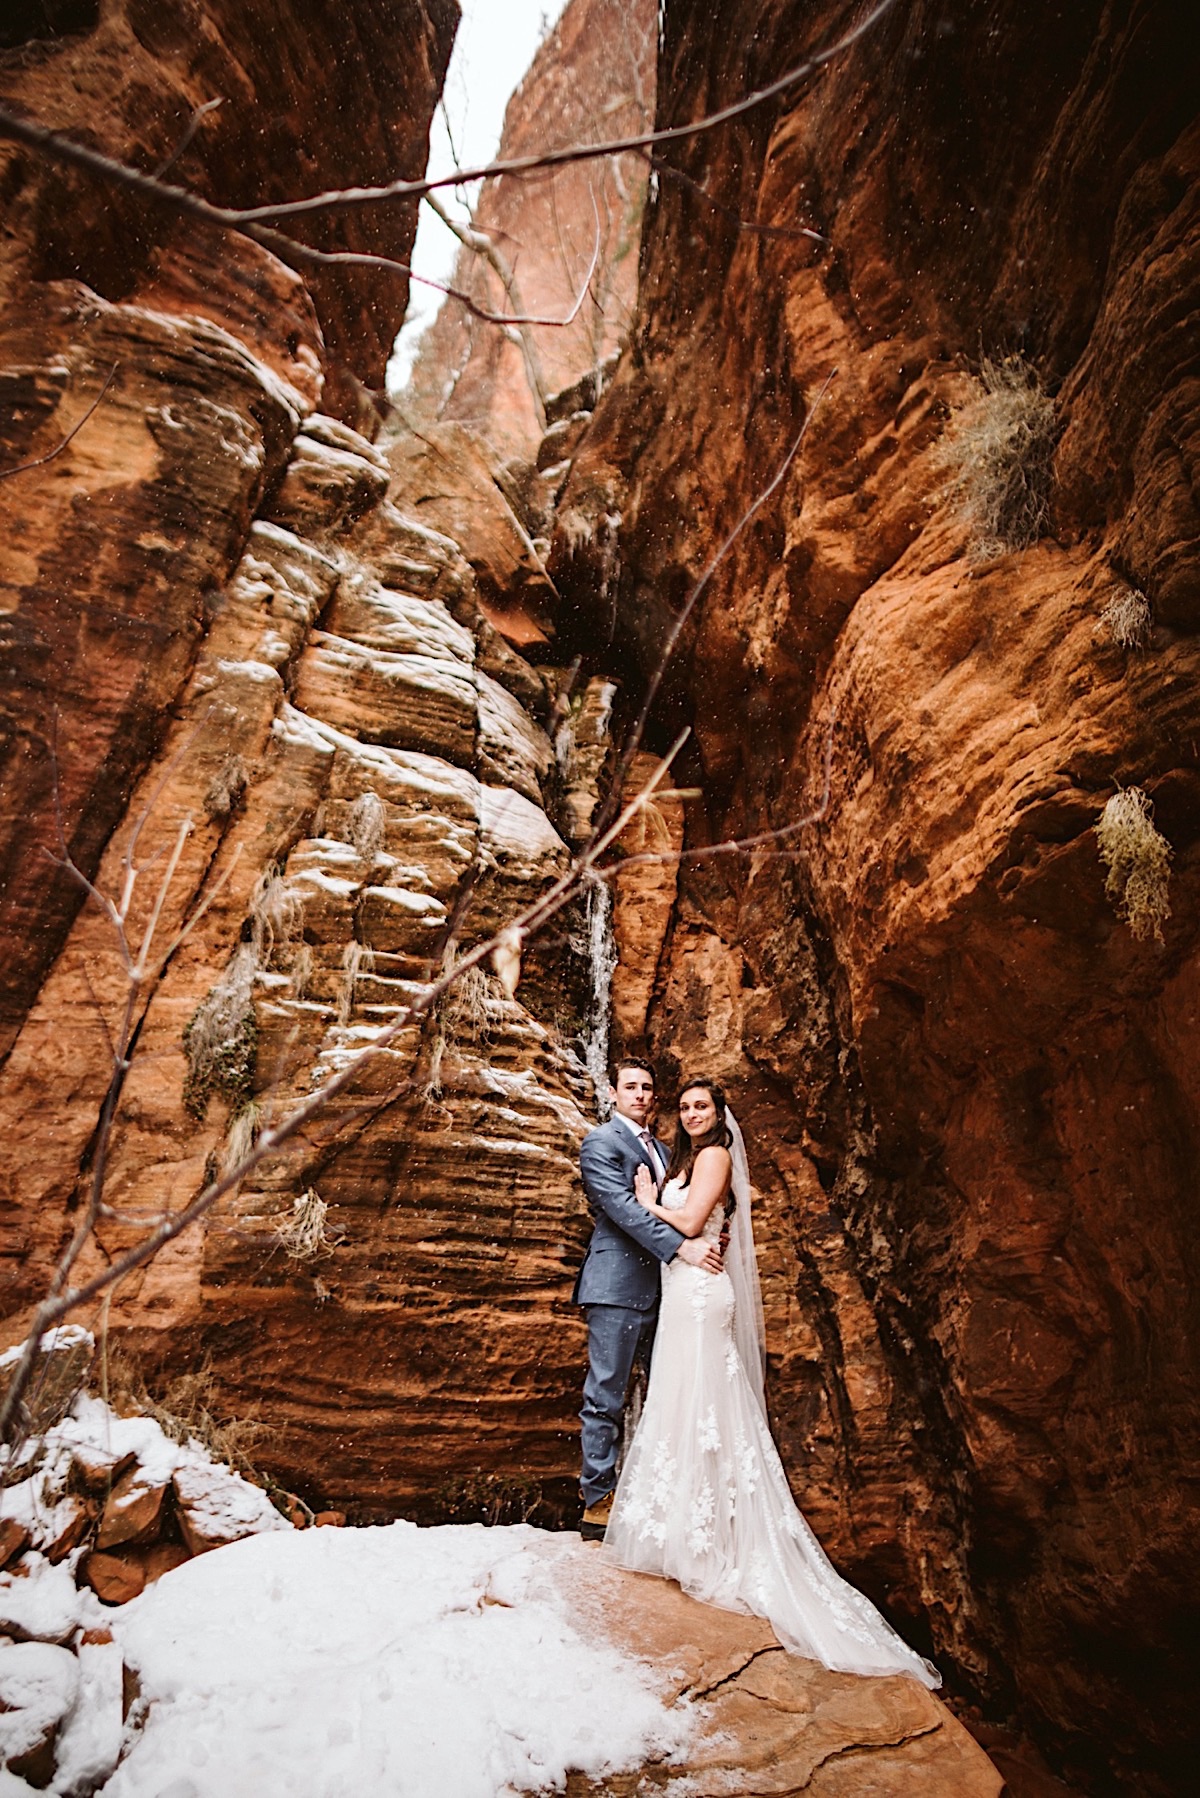 Bride and groom pose at the bottom of red cliffs at Zion National Park.